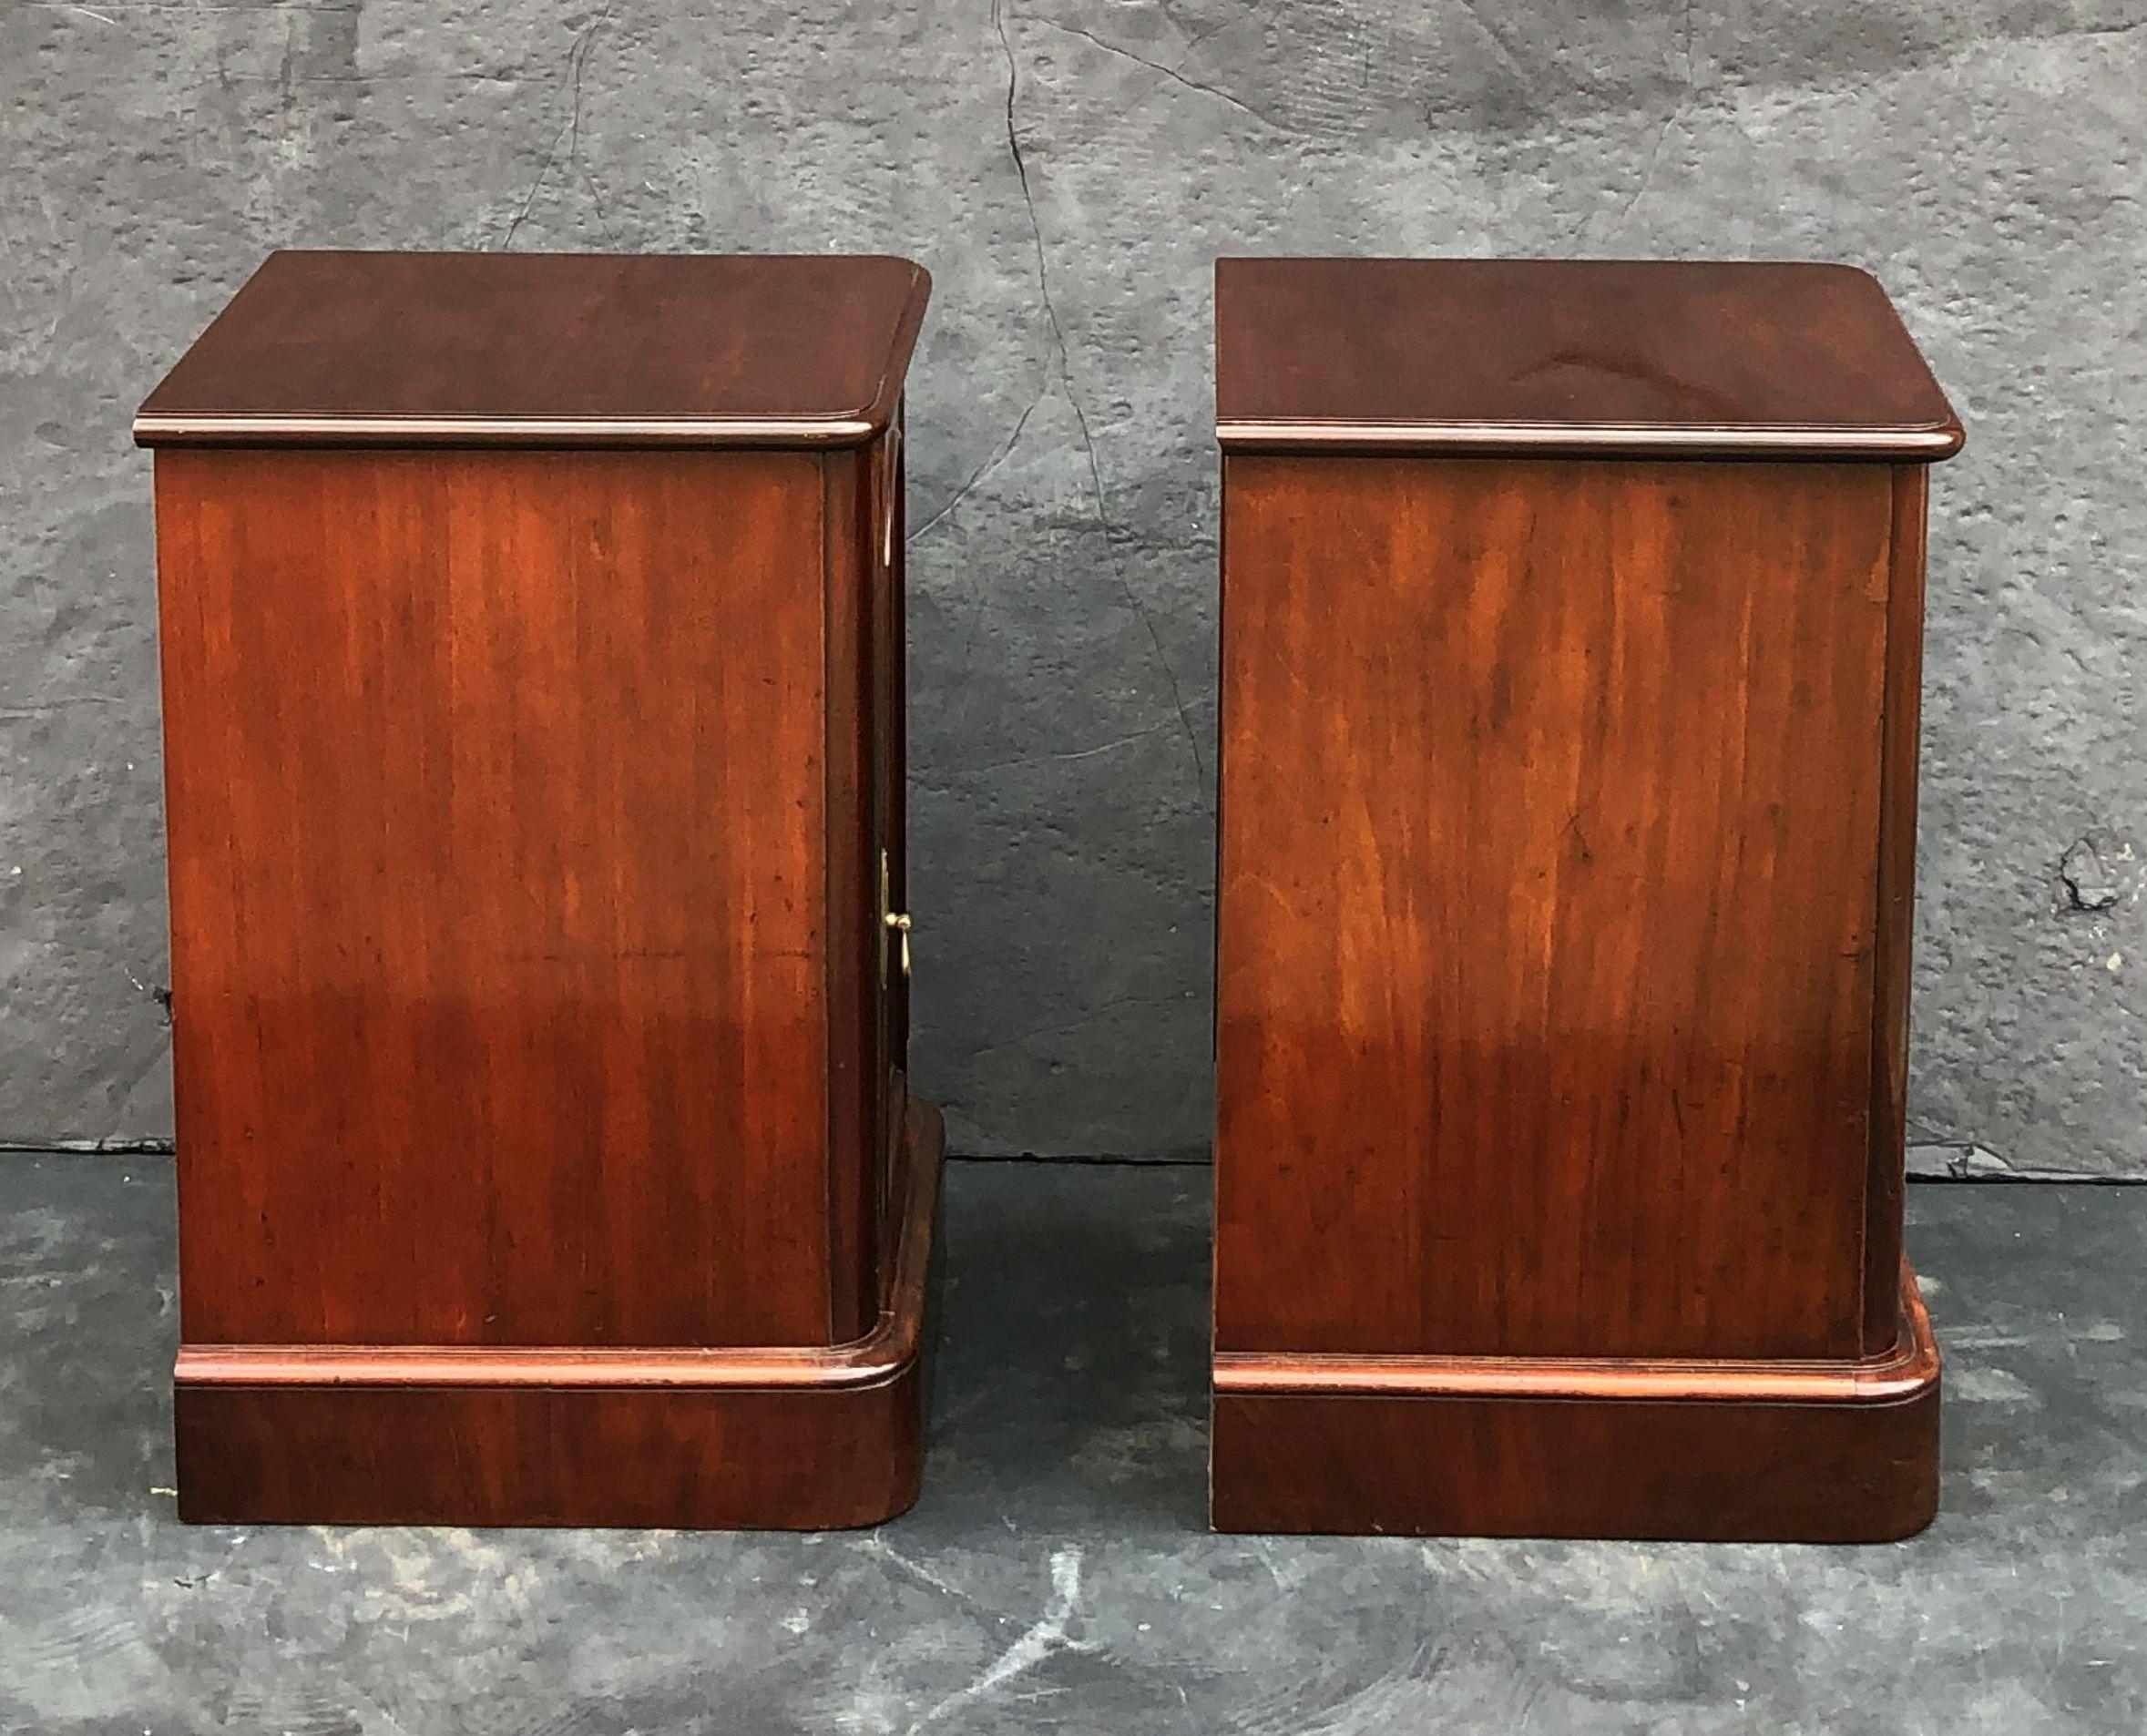 20th Century English Bedside Chests or Cabinet Nightstands of Mahogany, Priced as a Pair